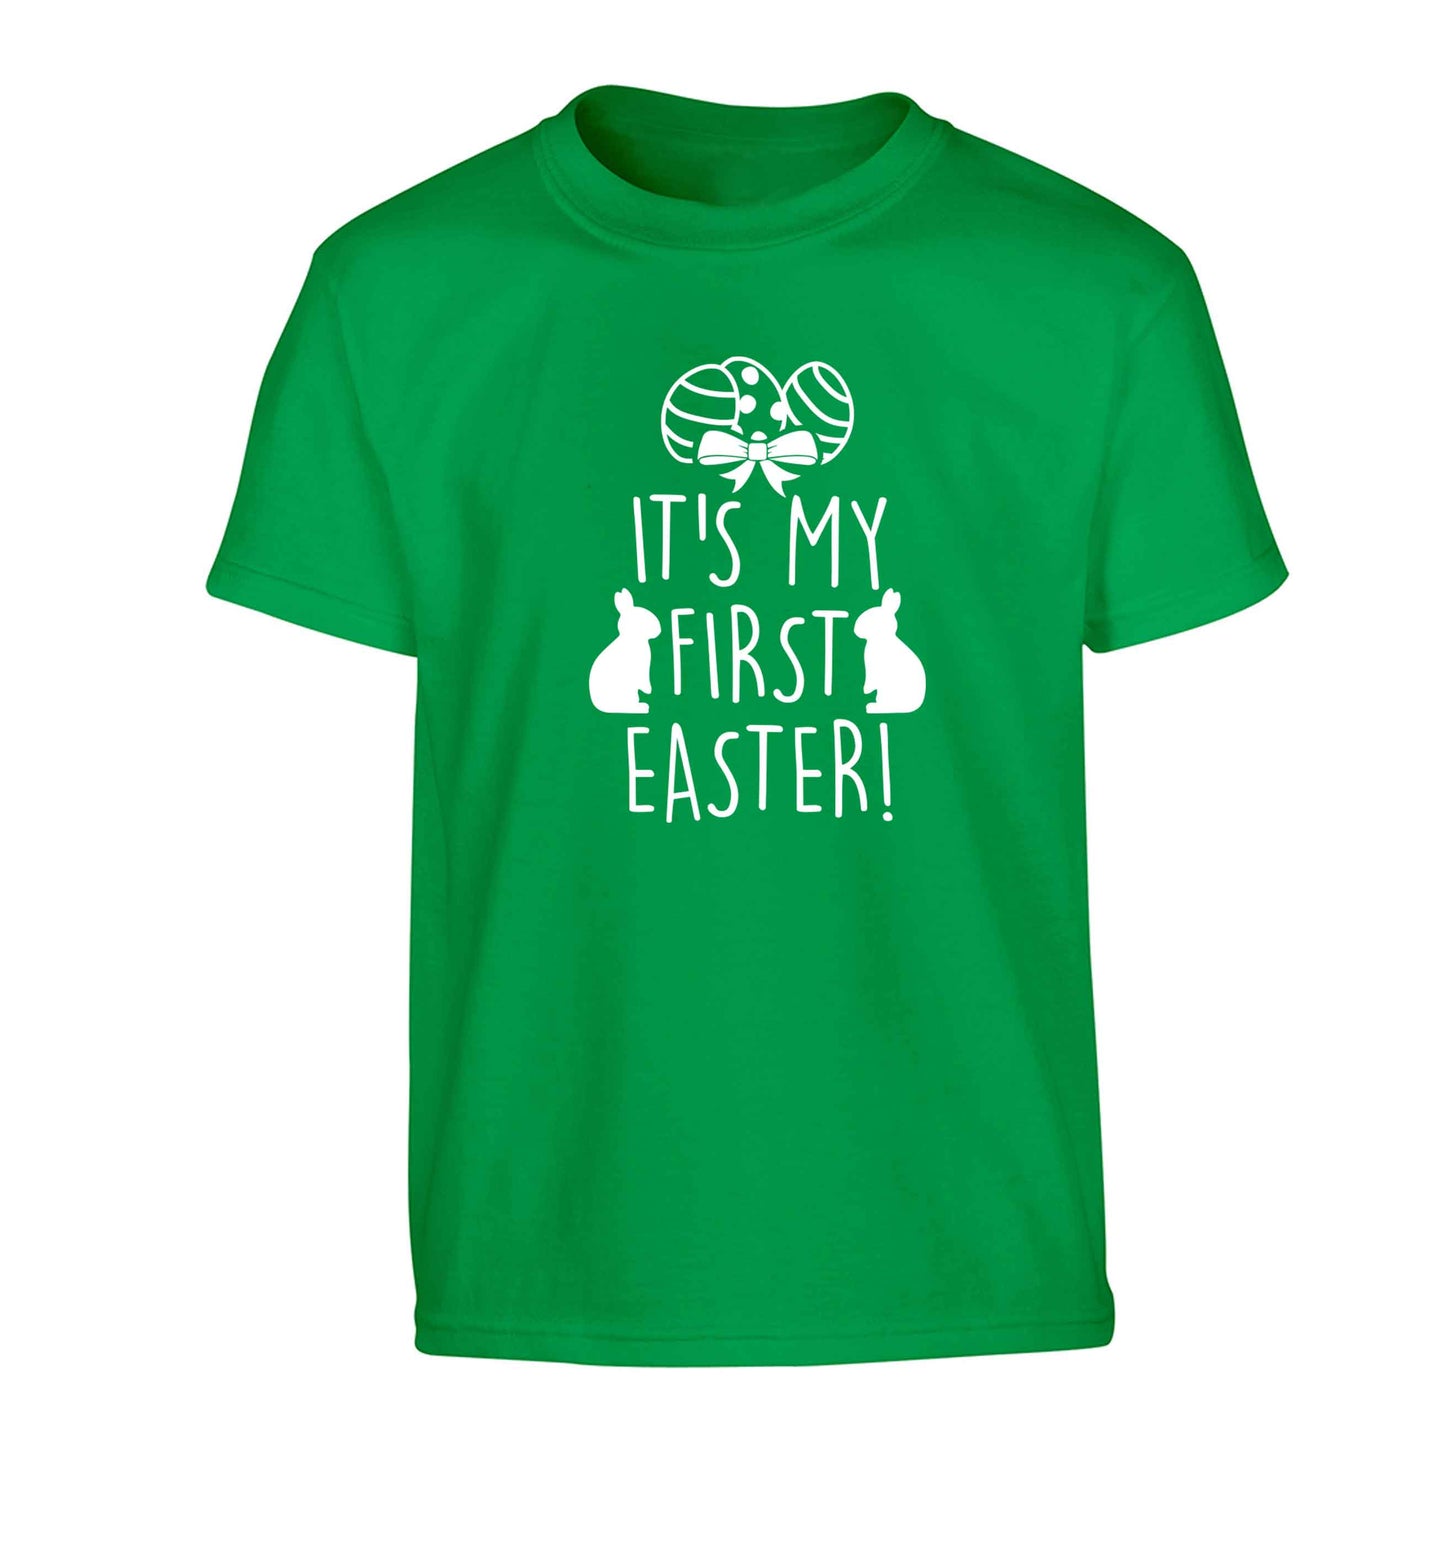 It's my first Easter Children's green Tshirt 12-13 Years